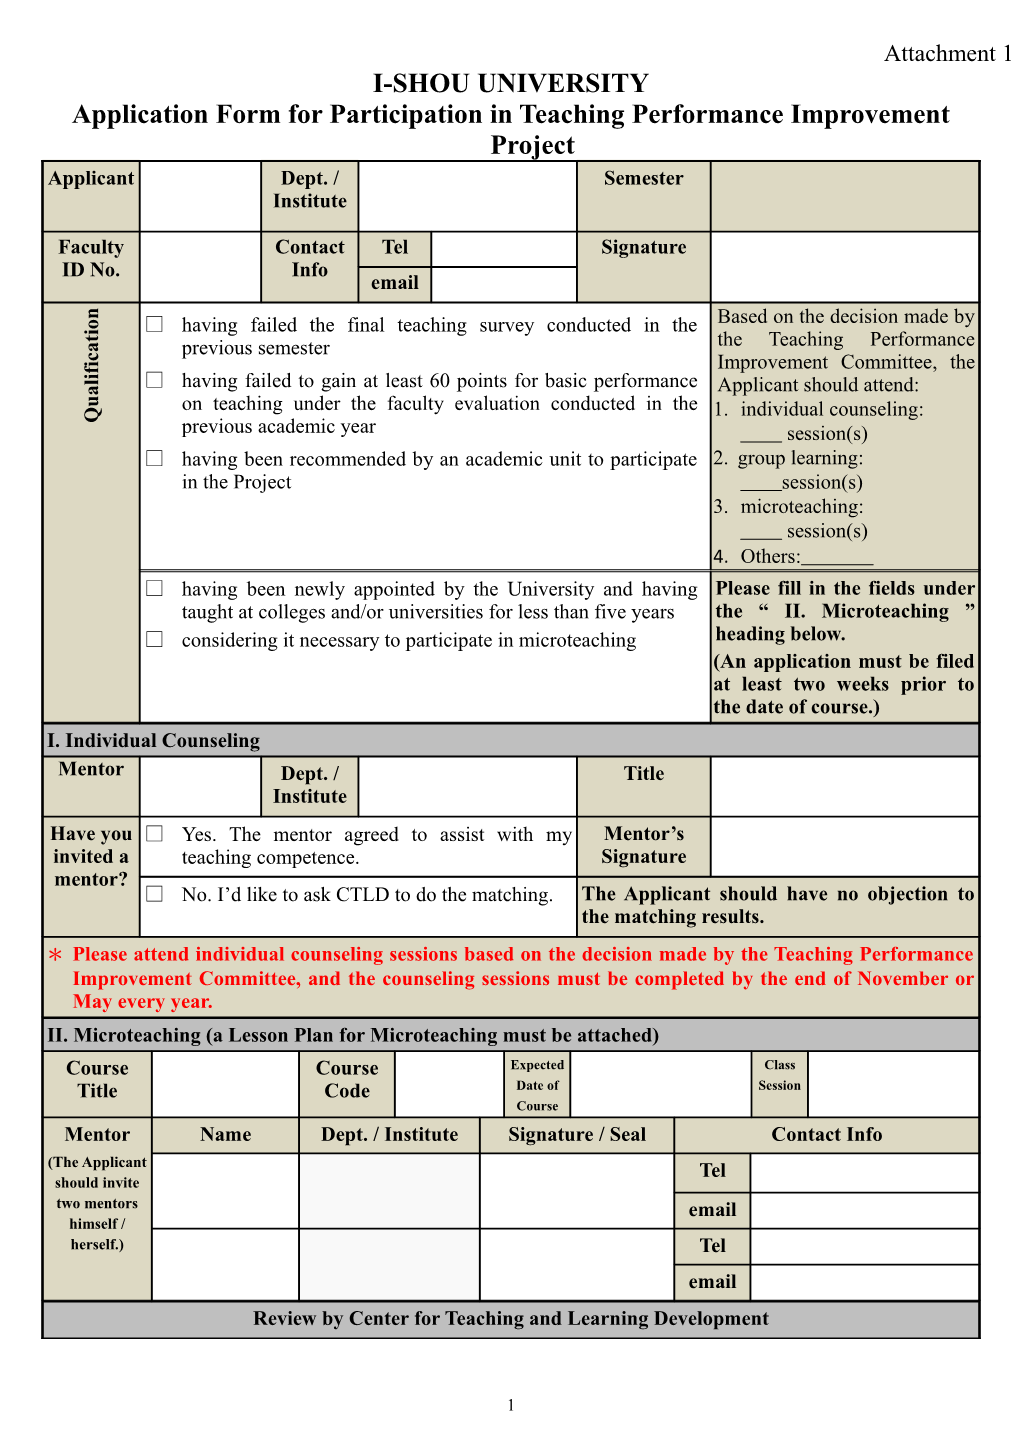 Application Form for Participation in Teaching Performance Improvement Project